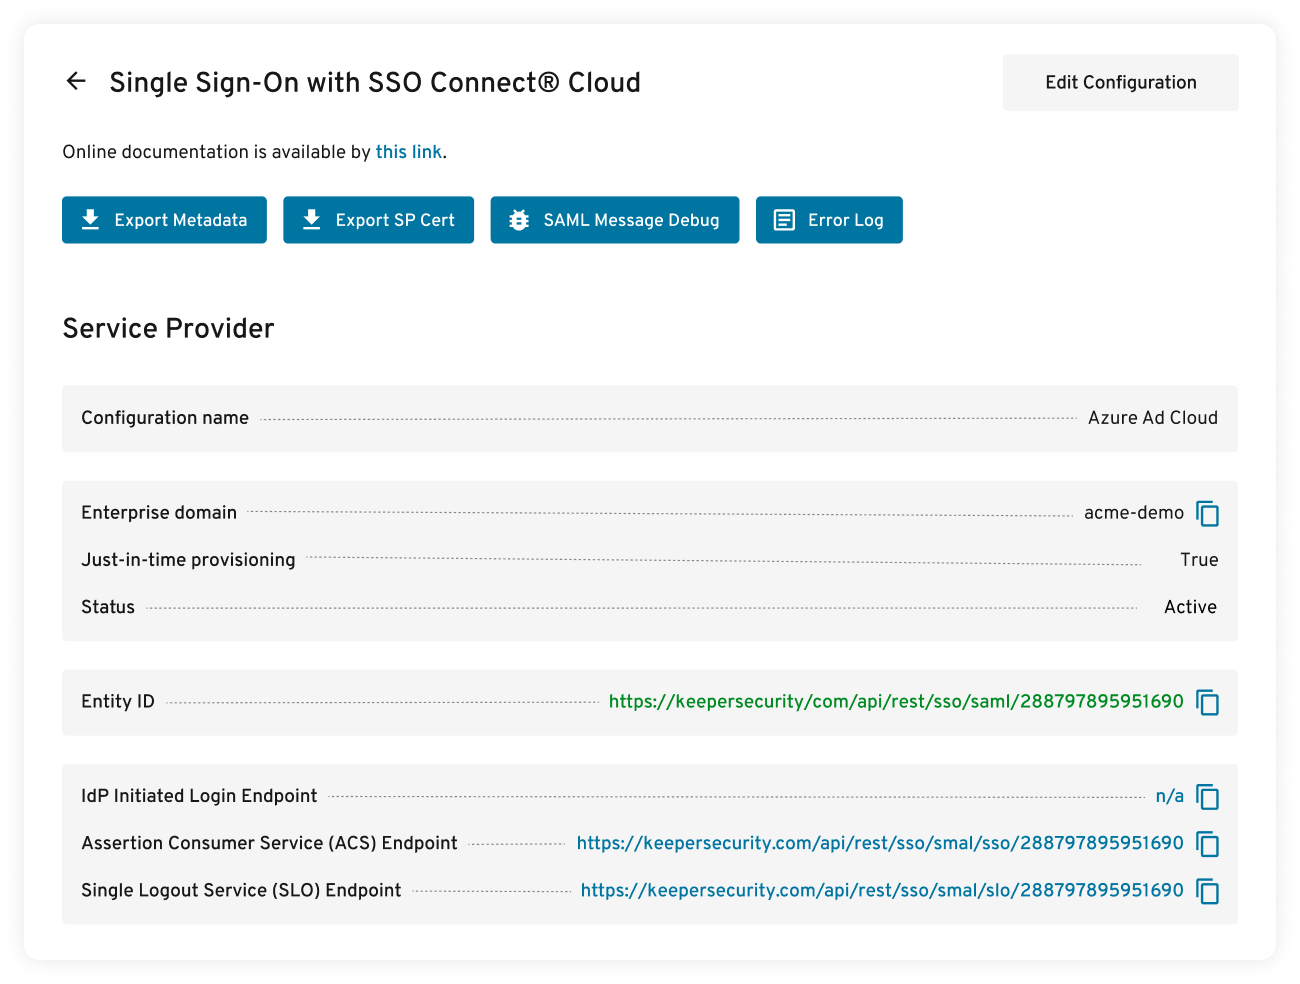 SAML 2.0 Authentication with SSO Connect Cloud